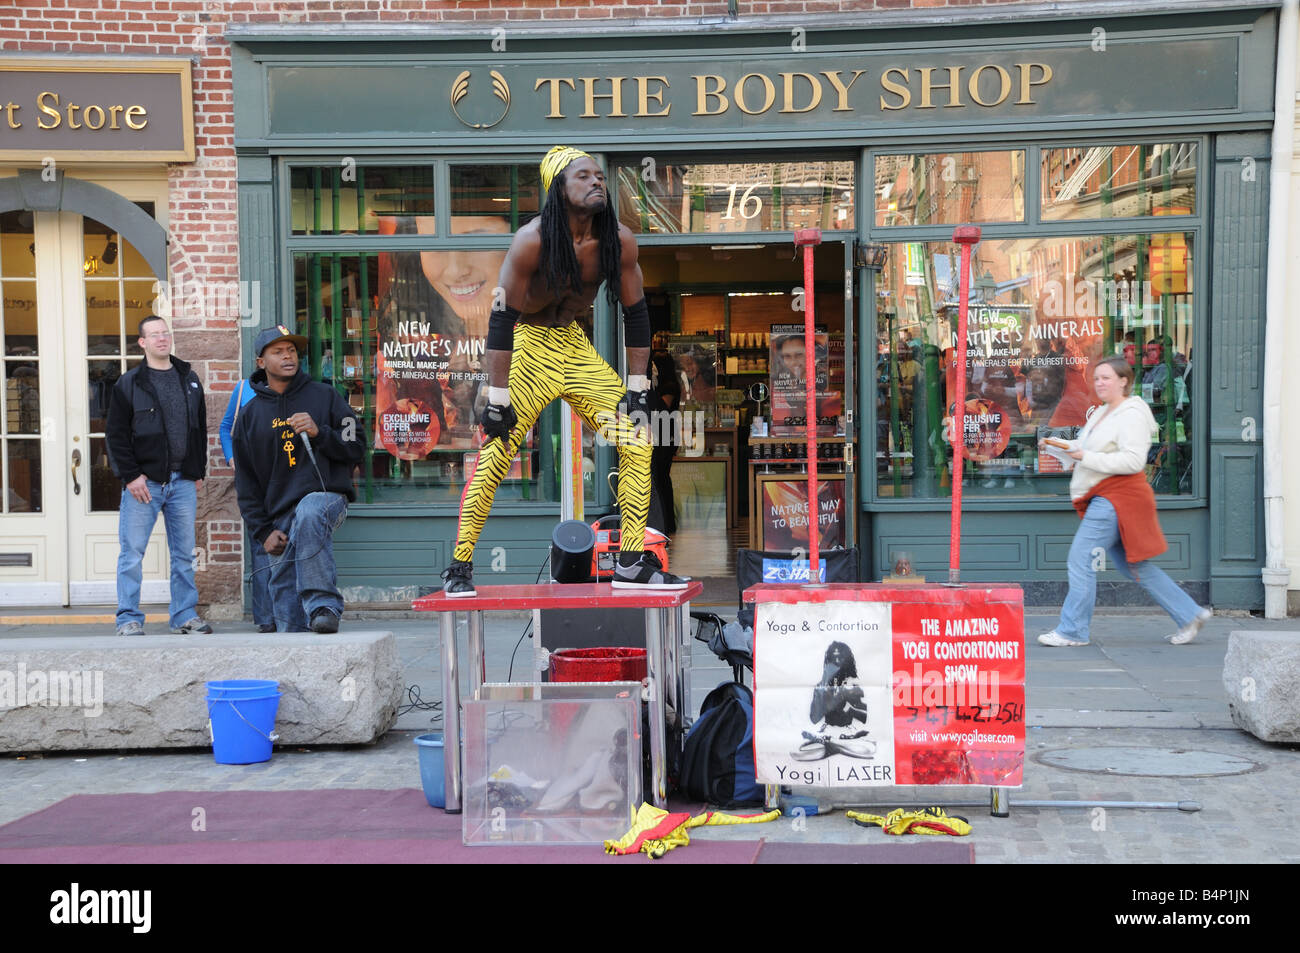 Yogi Laser, a street performer in the South Street Seaport in Lower  Manhattan Stock Photo - Alamy